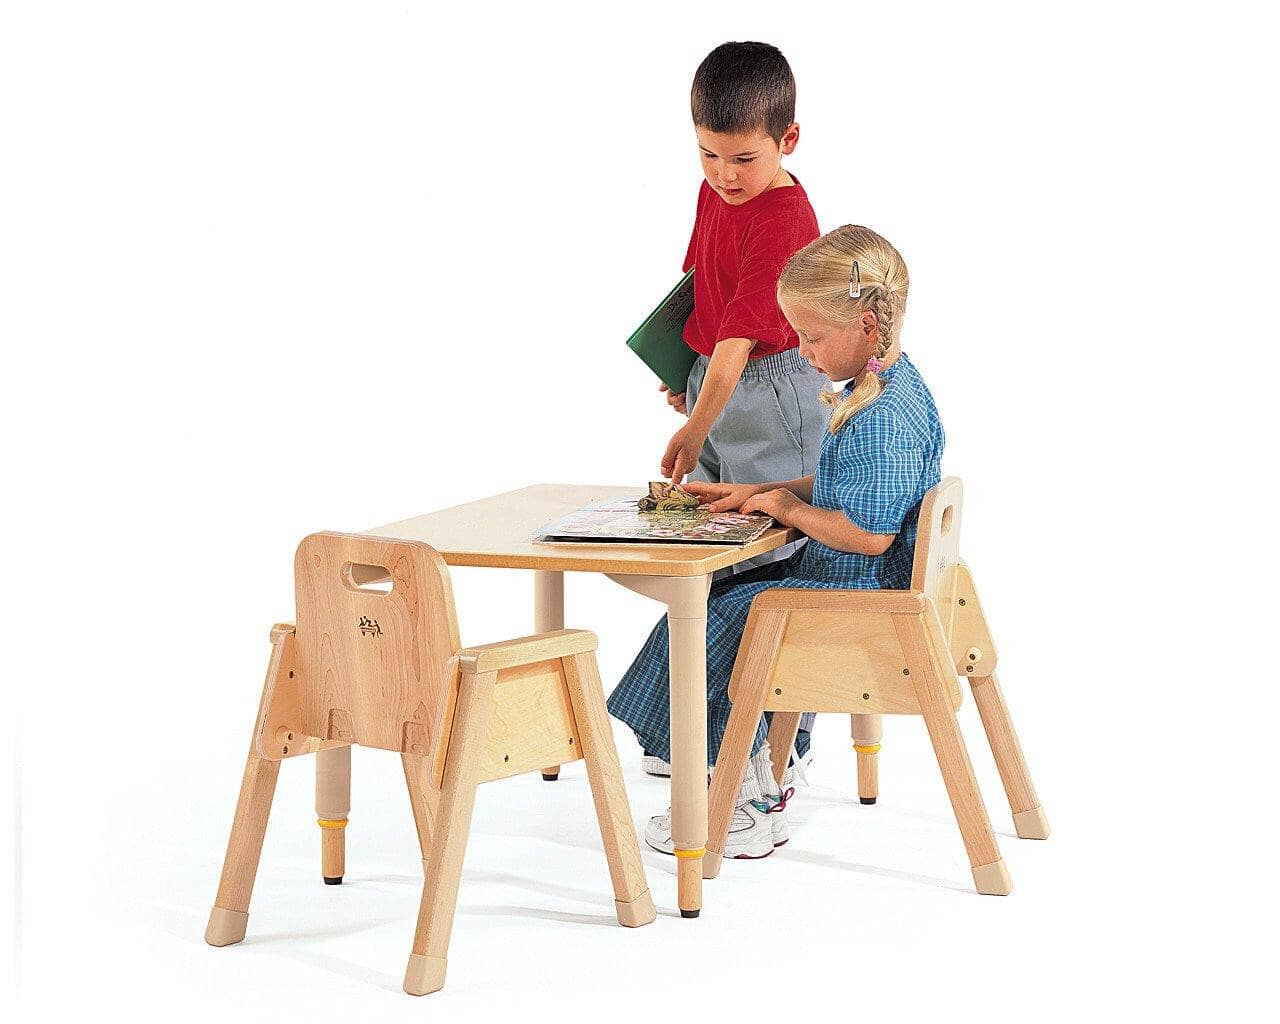 Childshape Chairs by Community Playthings - 10"H Furnishings Community Playthings for child care day care primary classrooms